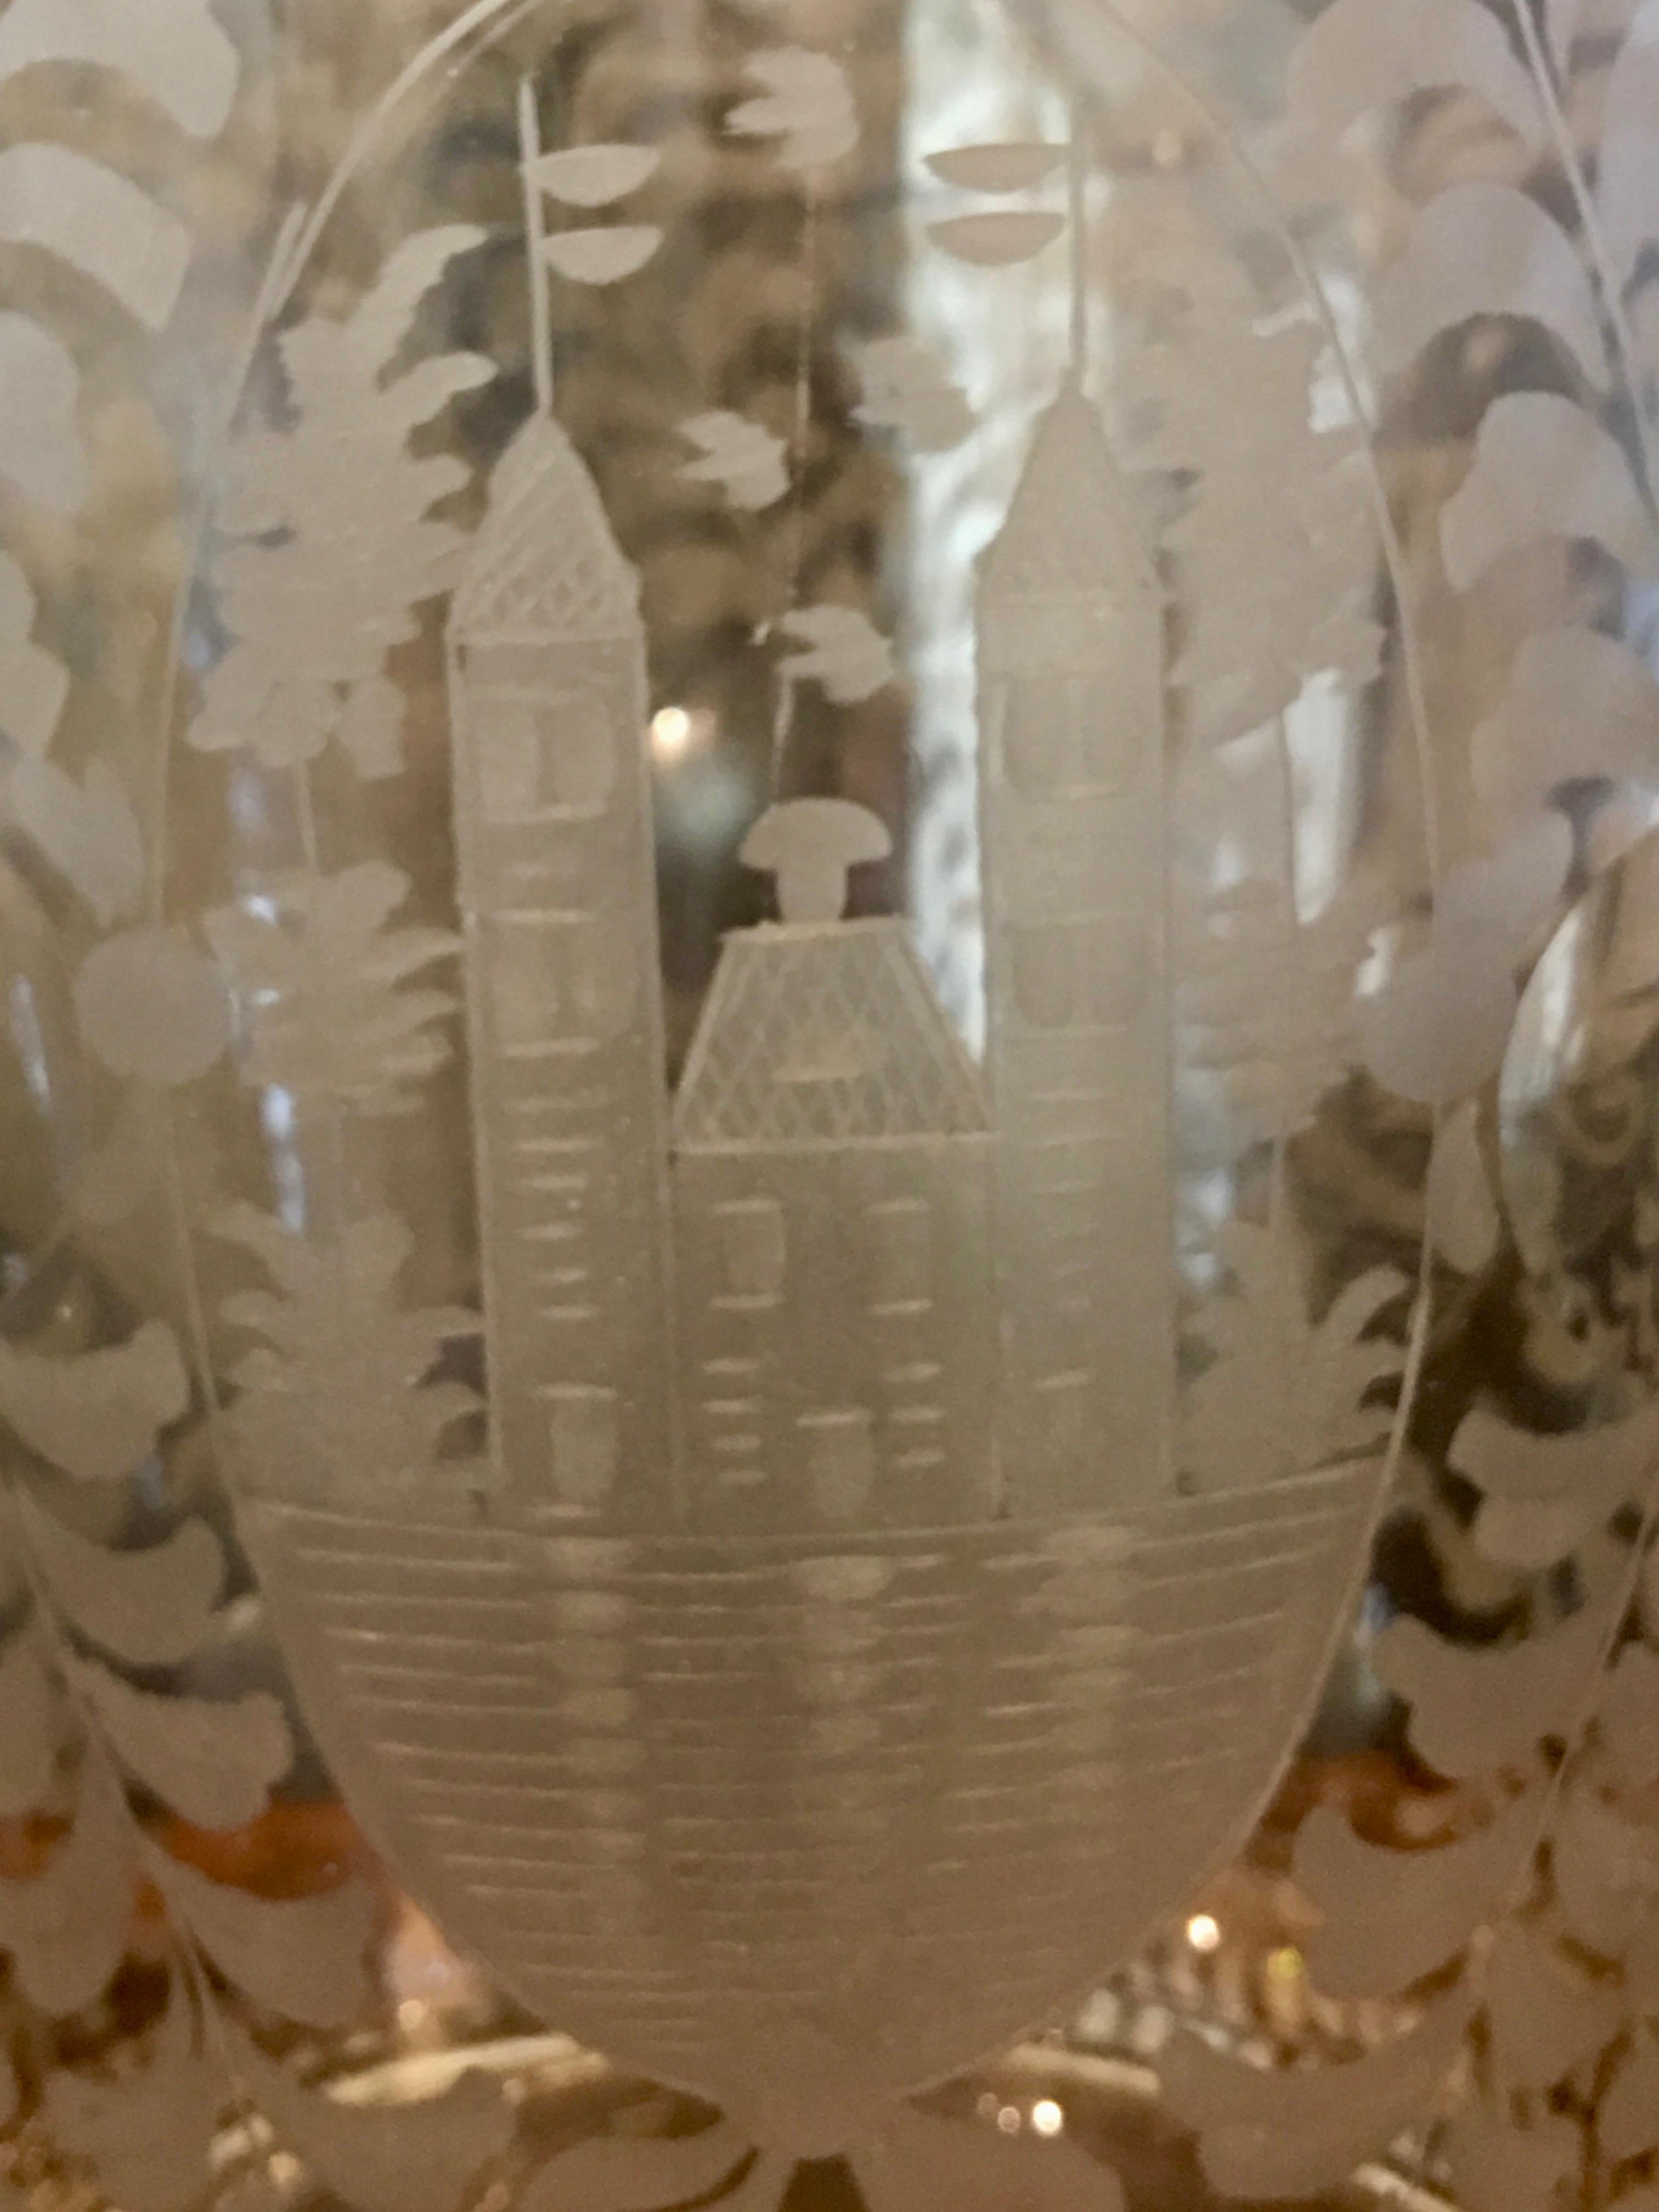 A Dutch large etched glass vase, 19th century
 
This spectacular Crystal Vase is surrounded by finely etched images of a ship, cathedral, leaves, and branches.
  